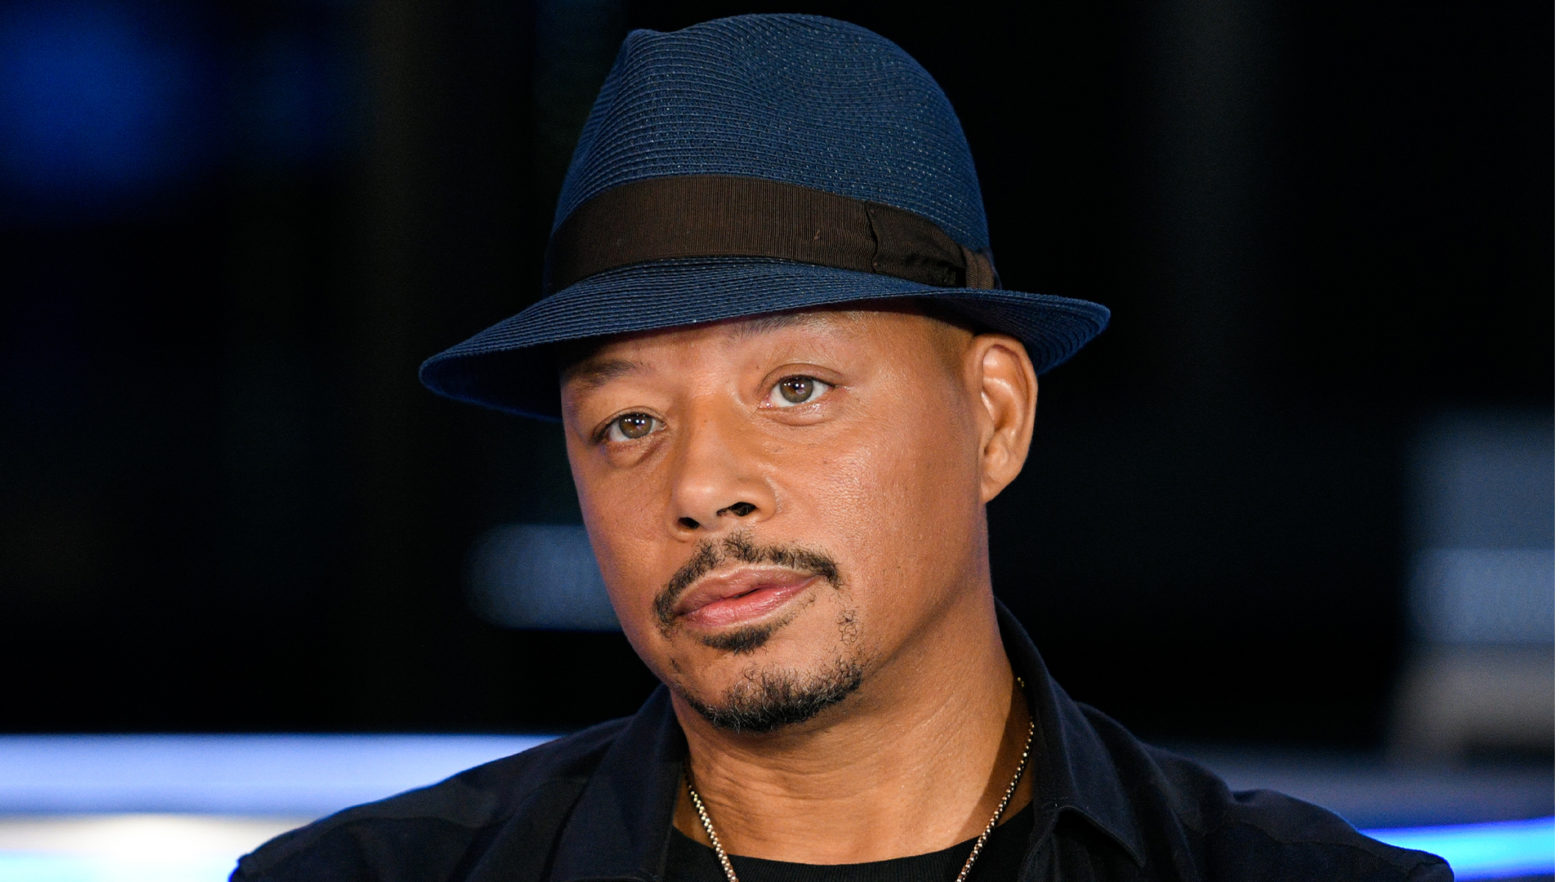 Terrence Howard Claims He Didn't Return To ‘Iron Man’ Sequel Because He Would Be Paid 1/8 Of Contract